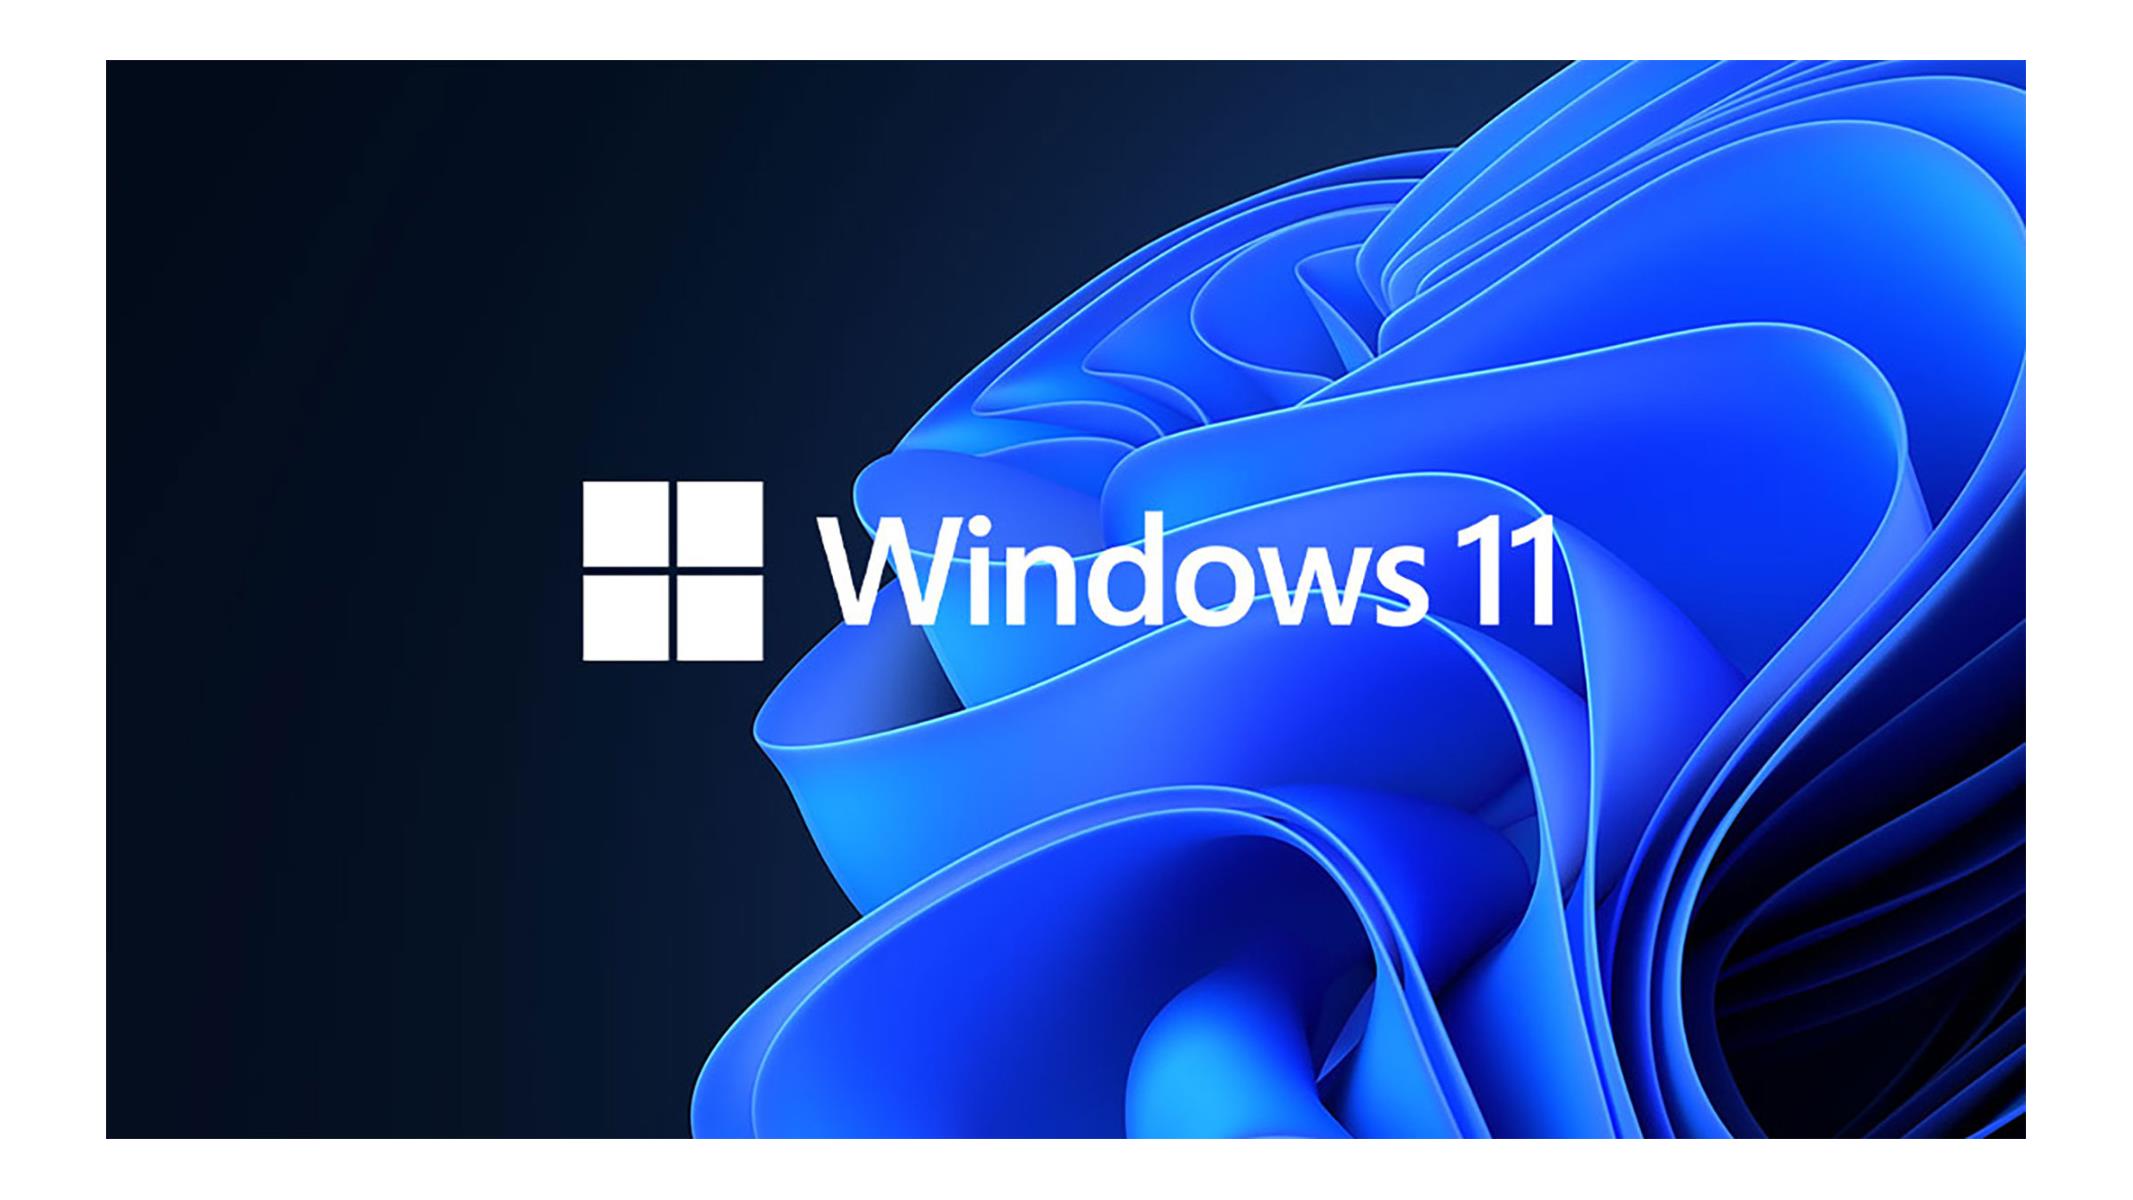 You'll be able to bypass Windows 11 TPM 2.0 requirement